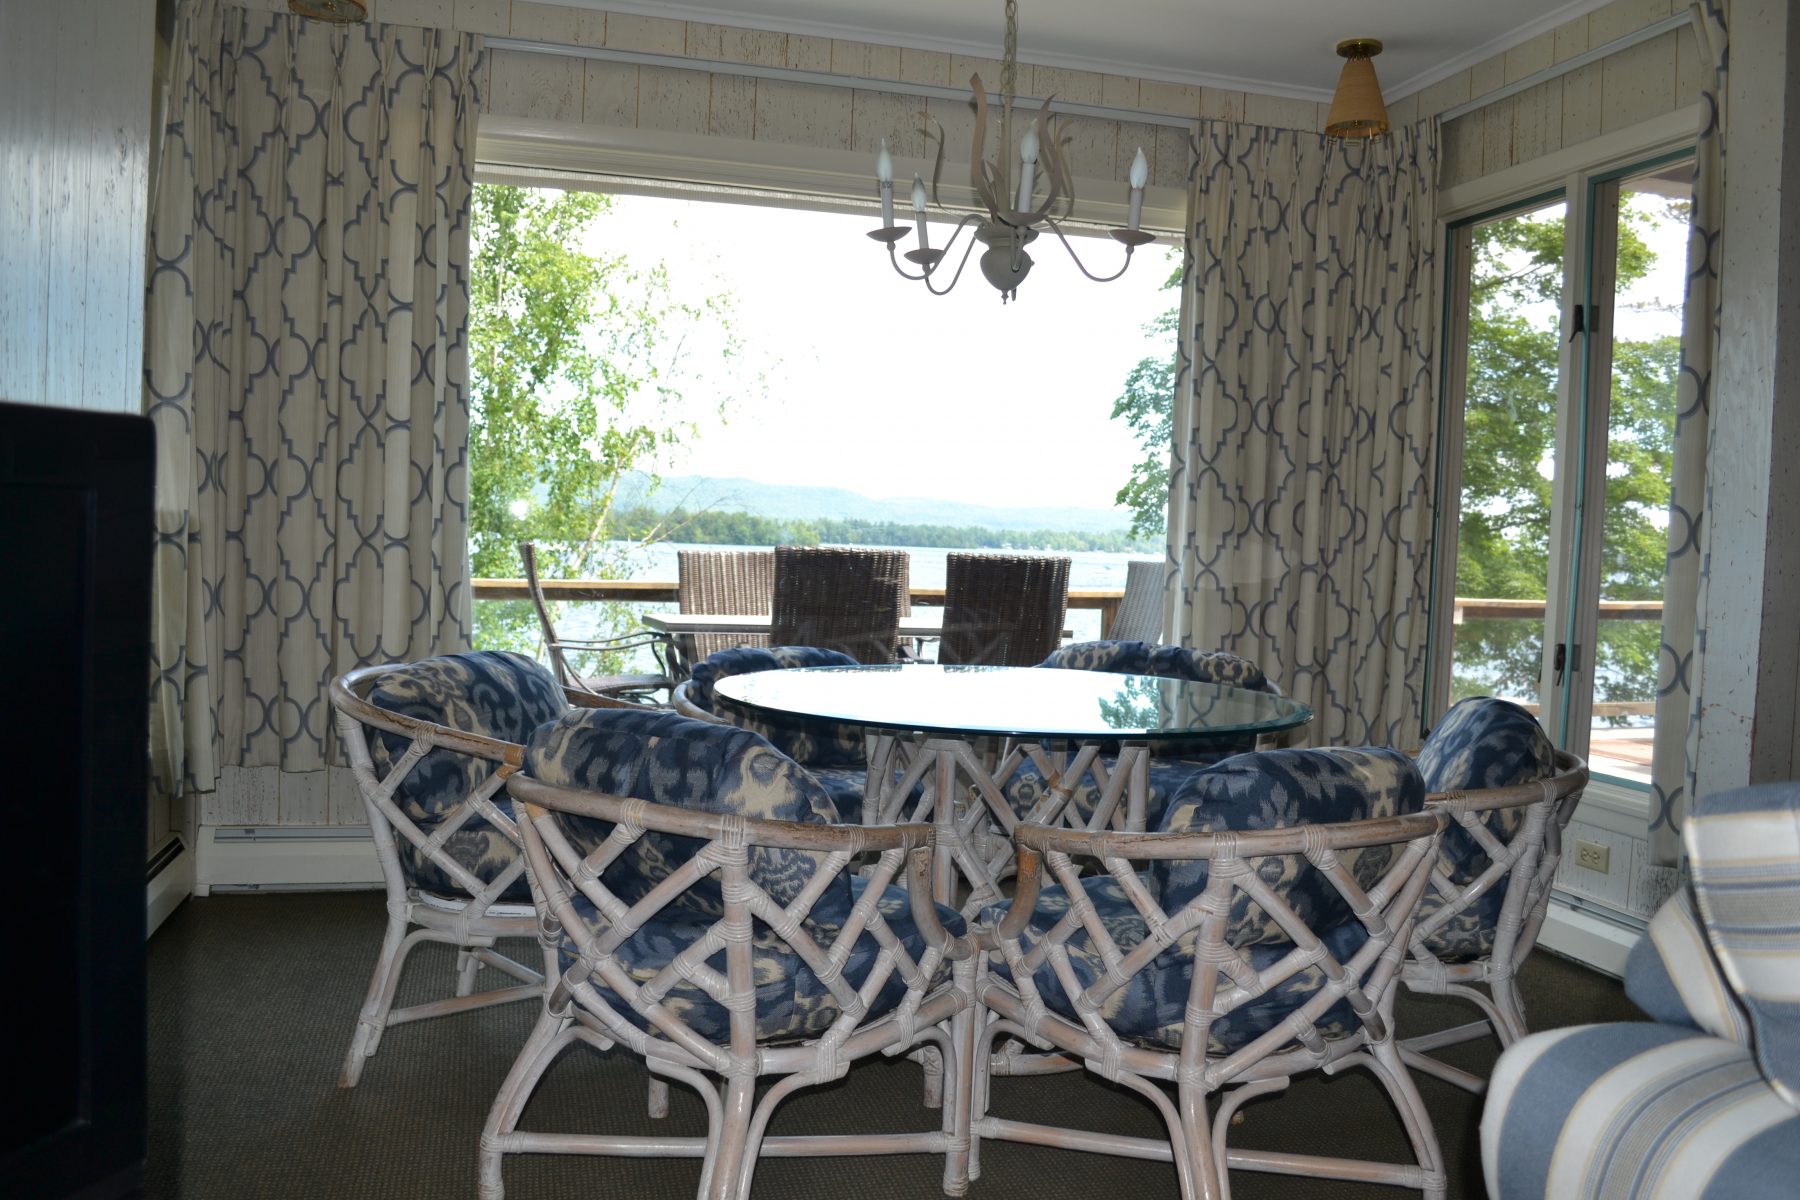 Round glass table with chairs around looking out large bay window